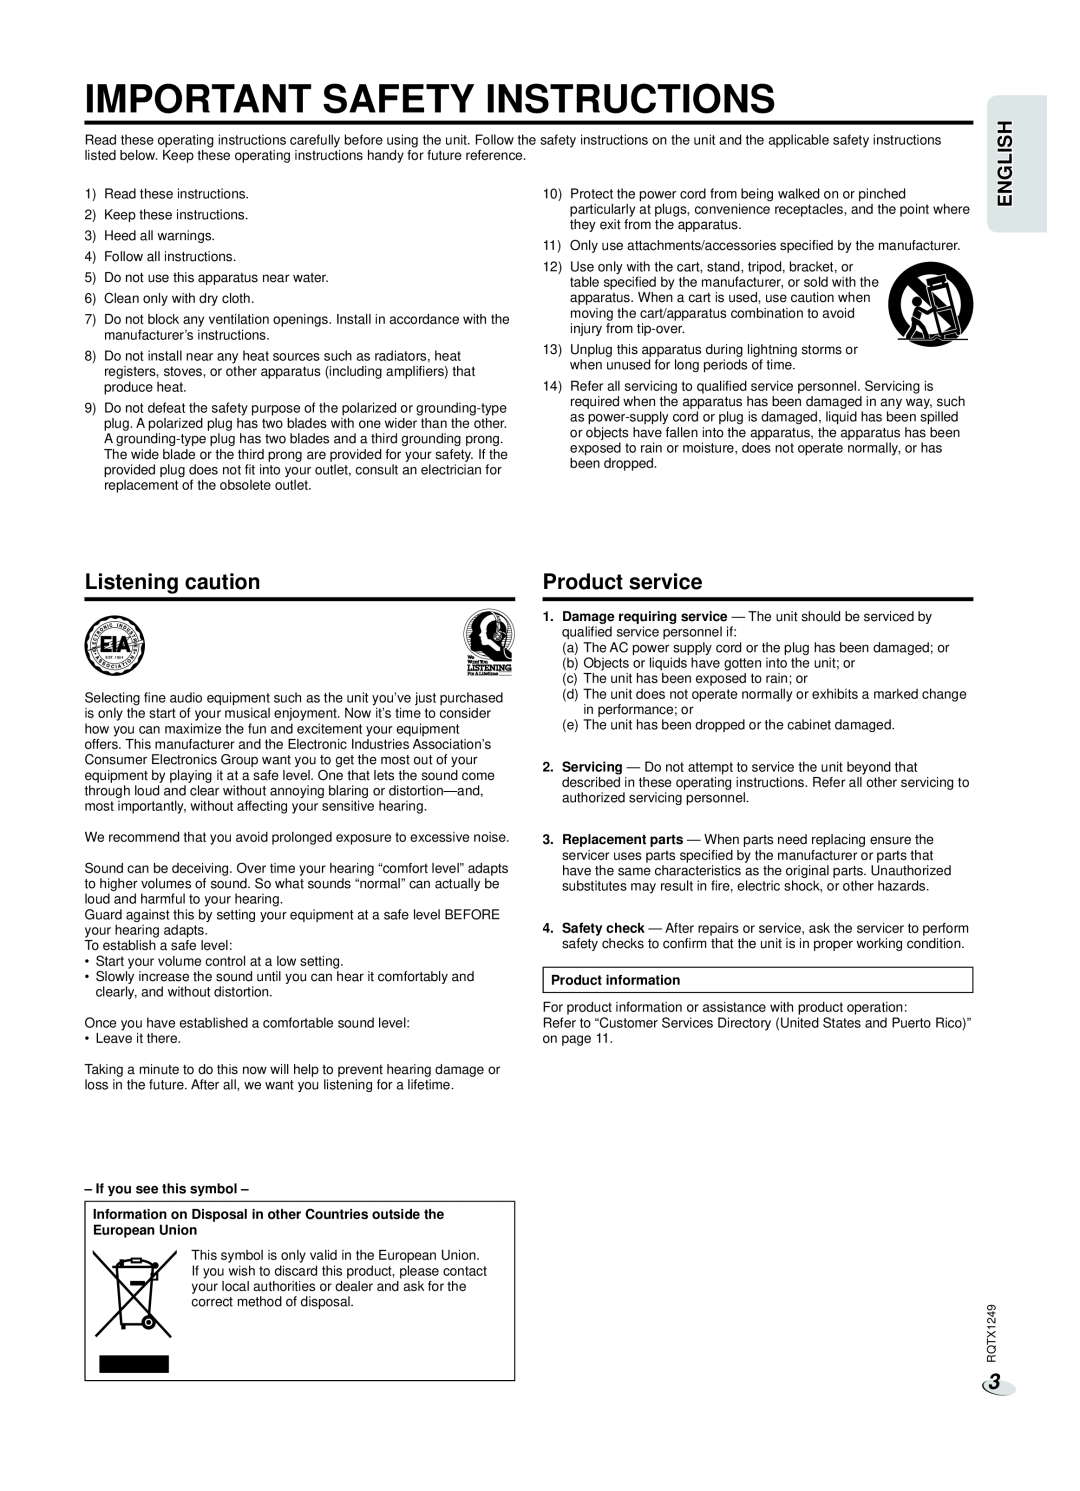 Panasonic SC-HC25 owner manual Listening caution, Product service, Important Safety Instructions, English 